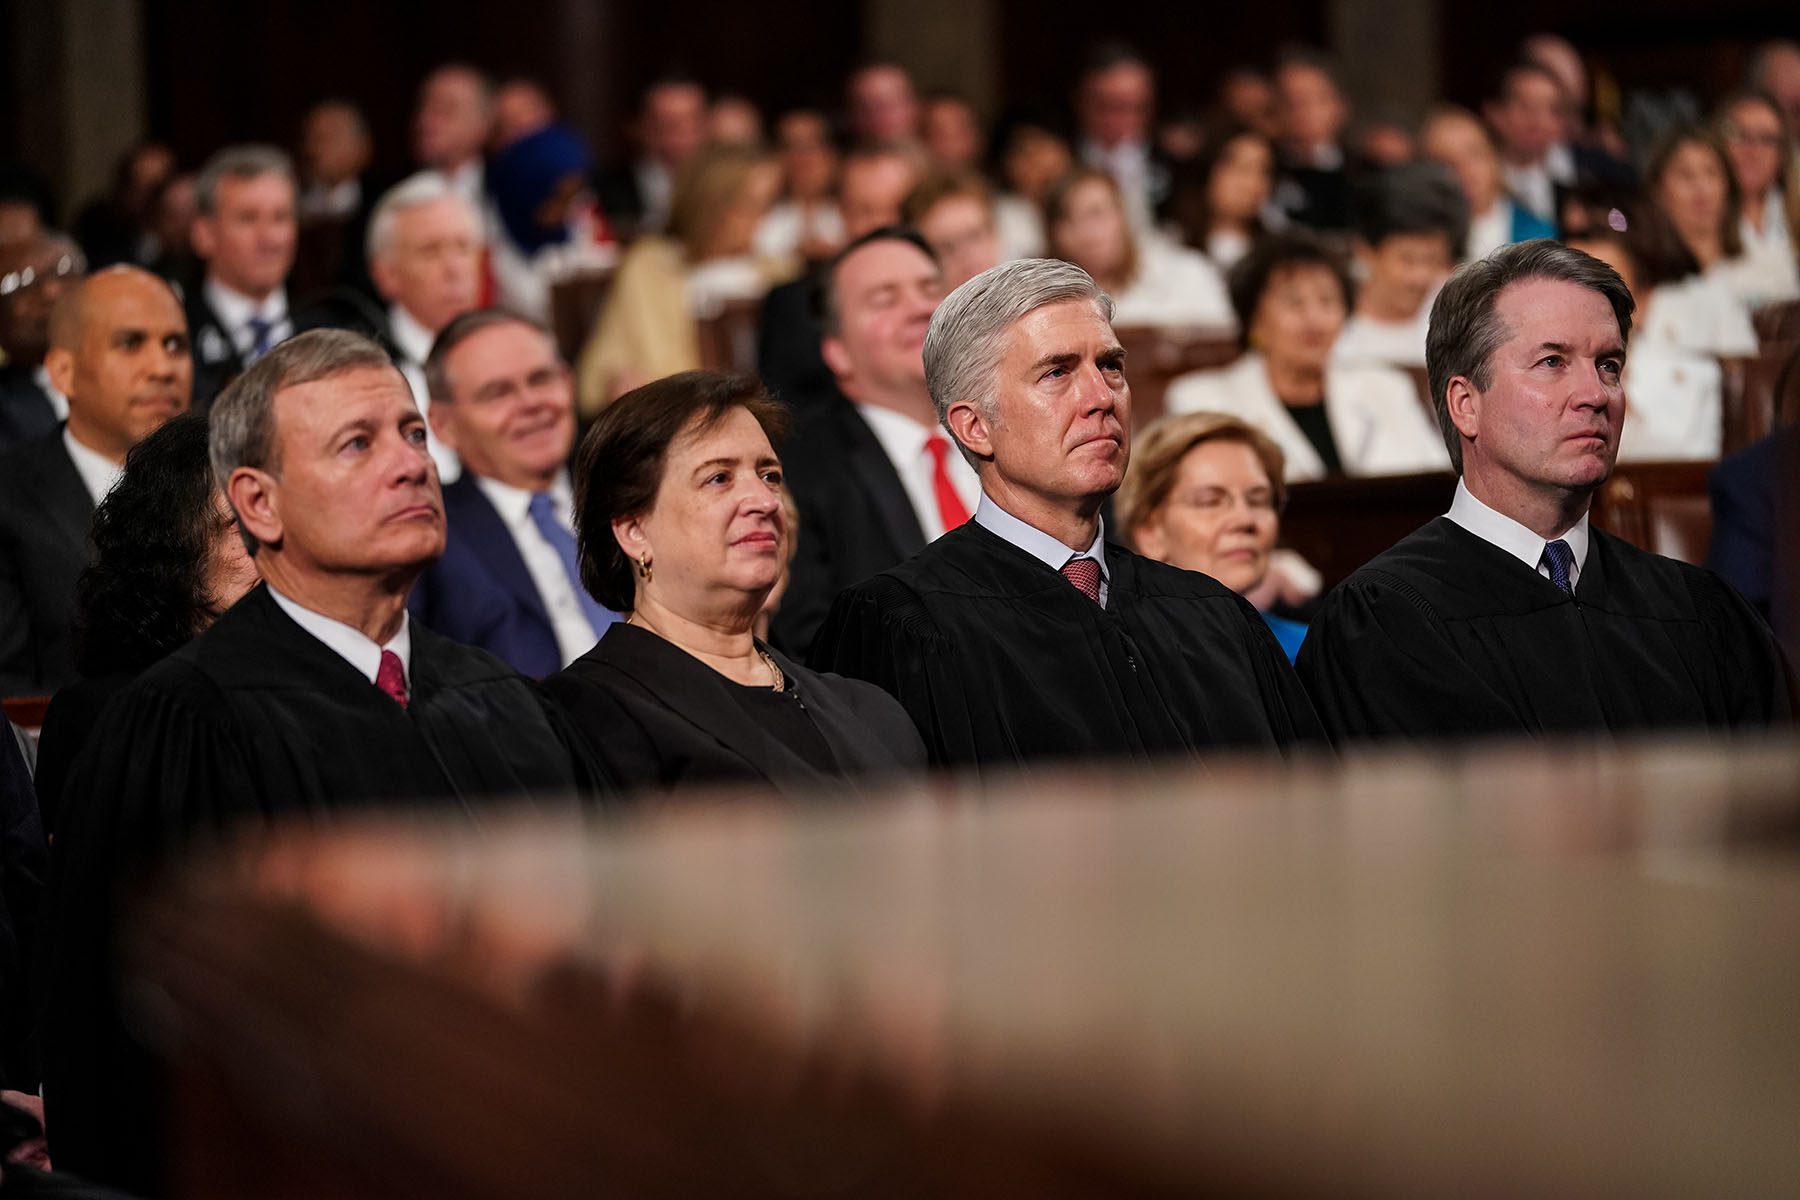 Supreme Court Justices attend the State of the Union address.